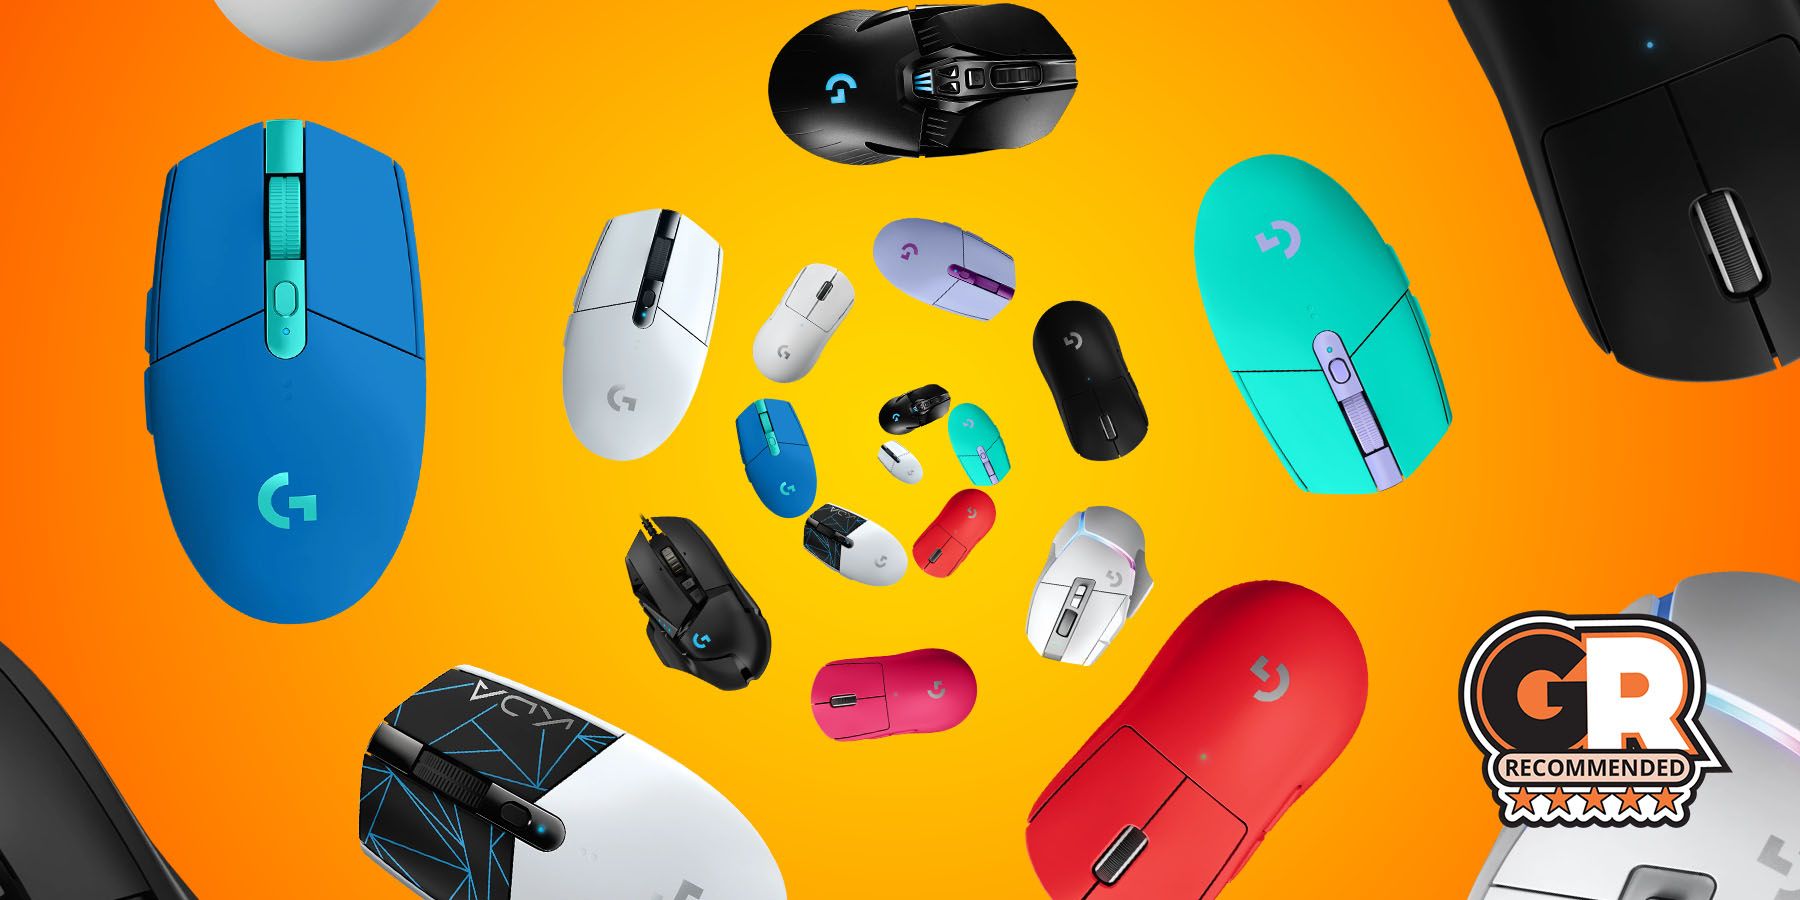 The Best Logitech Gaming Mice In 2022